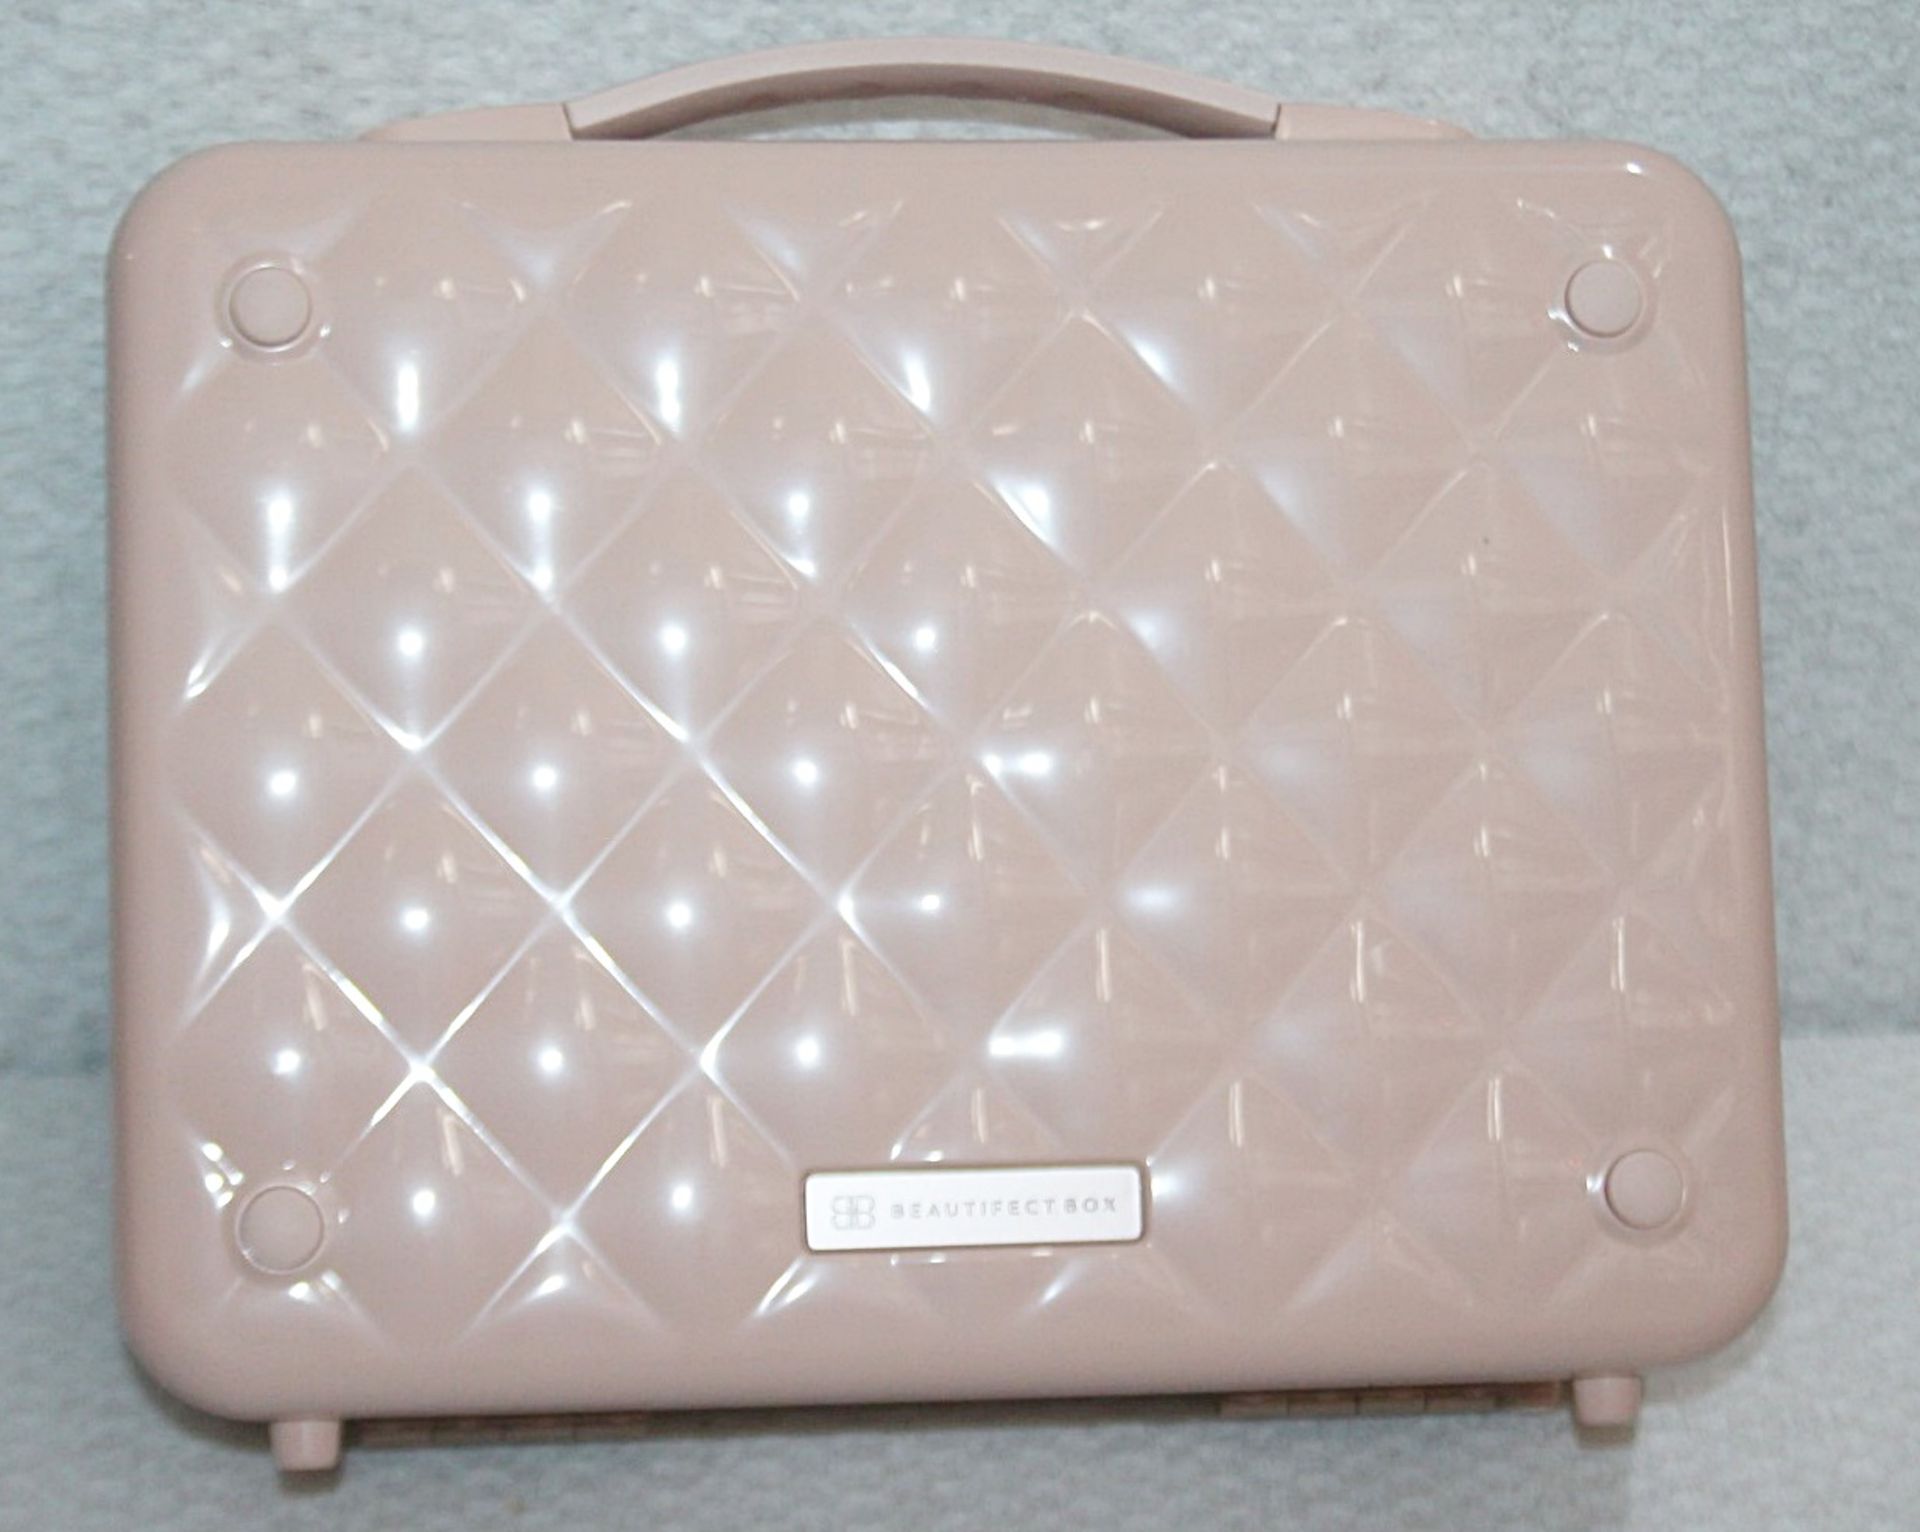 1 x BEAUTIFECT 'Beautifect Box' Make-Up Carry Case With Built-in Illuminated Mirror - RRP £279.00 - Image 10 of 13